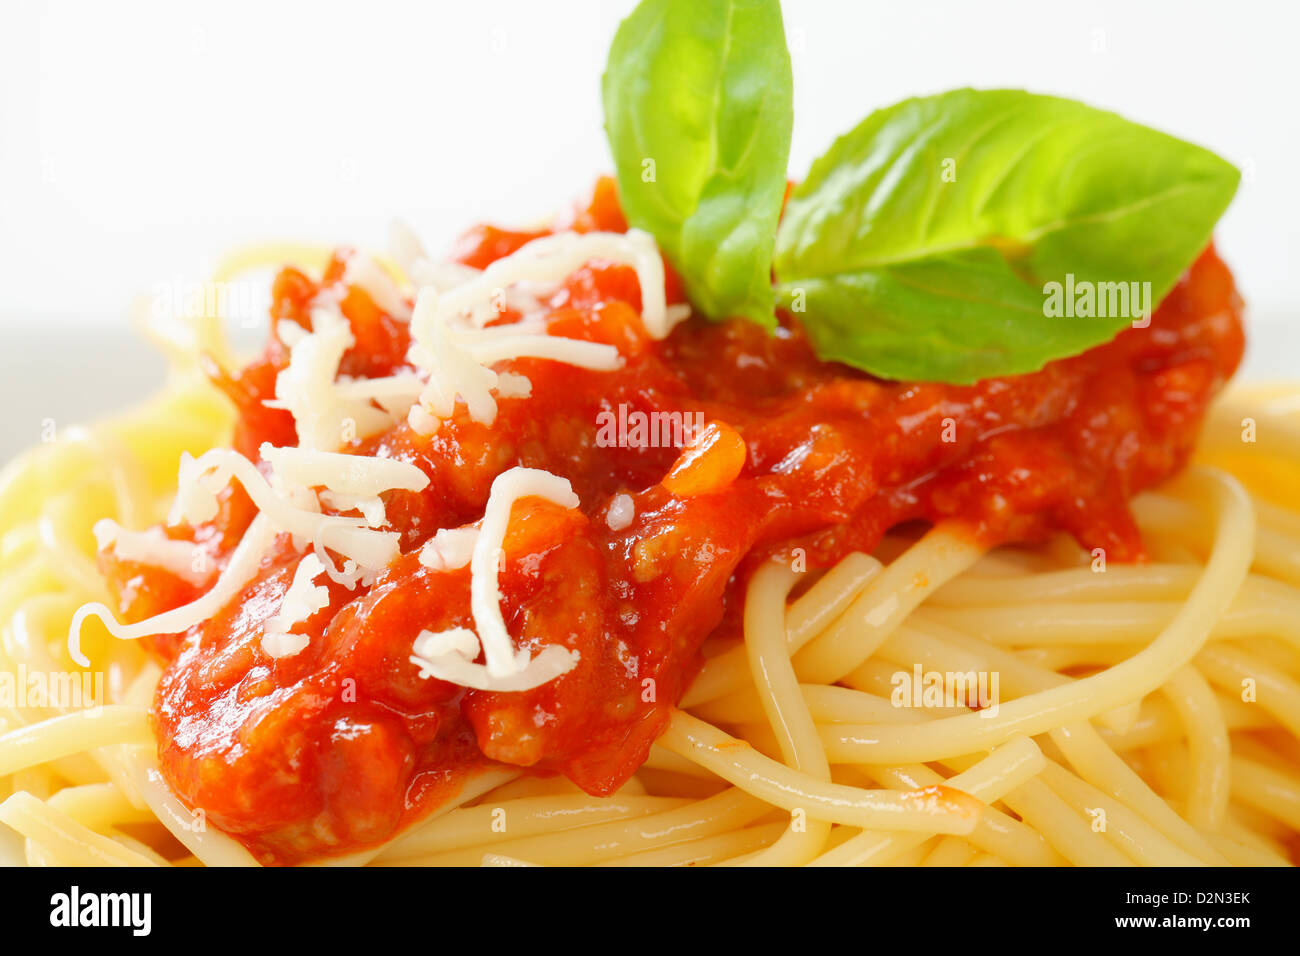 Spaghetti with meat-based tomato sauce and cheese Stock Photo